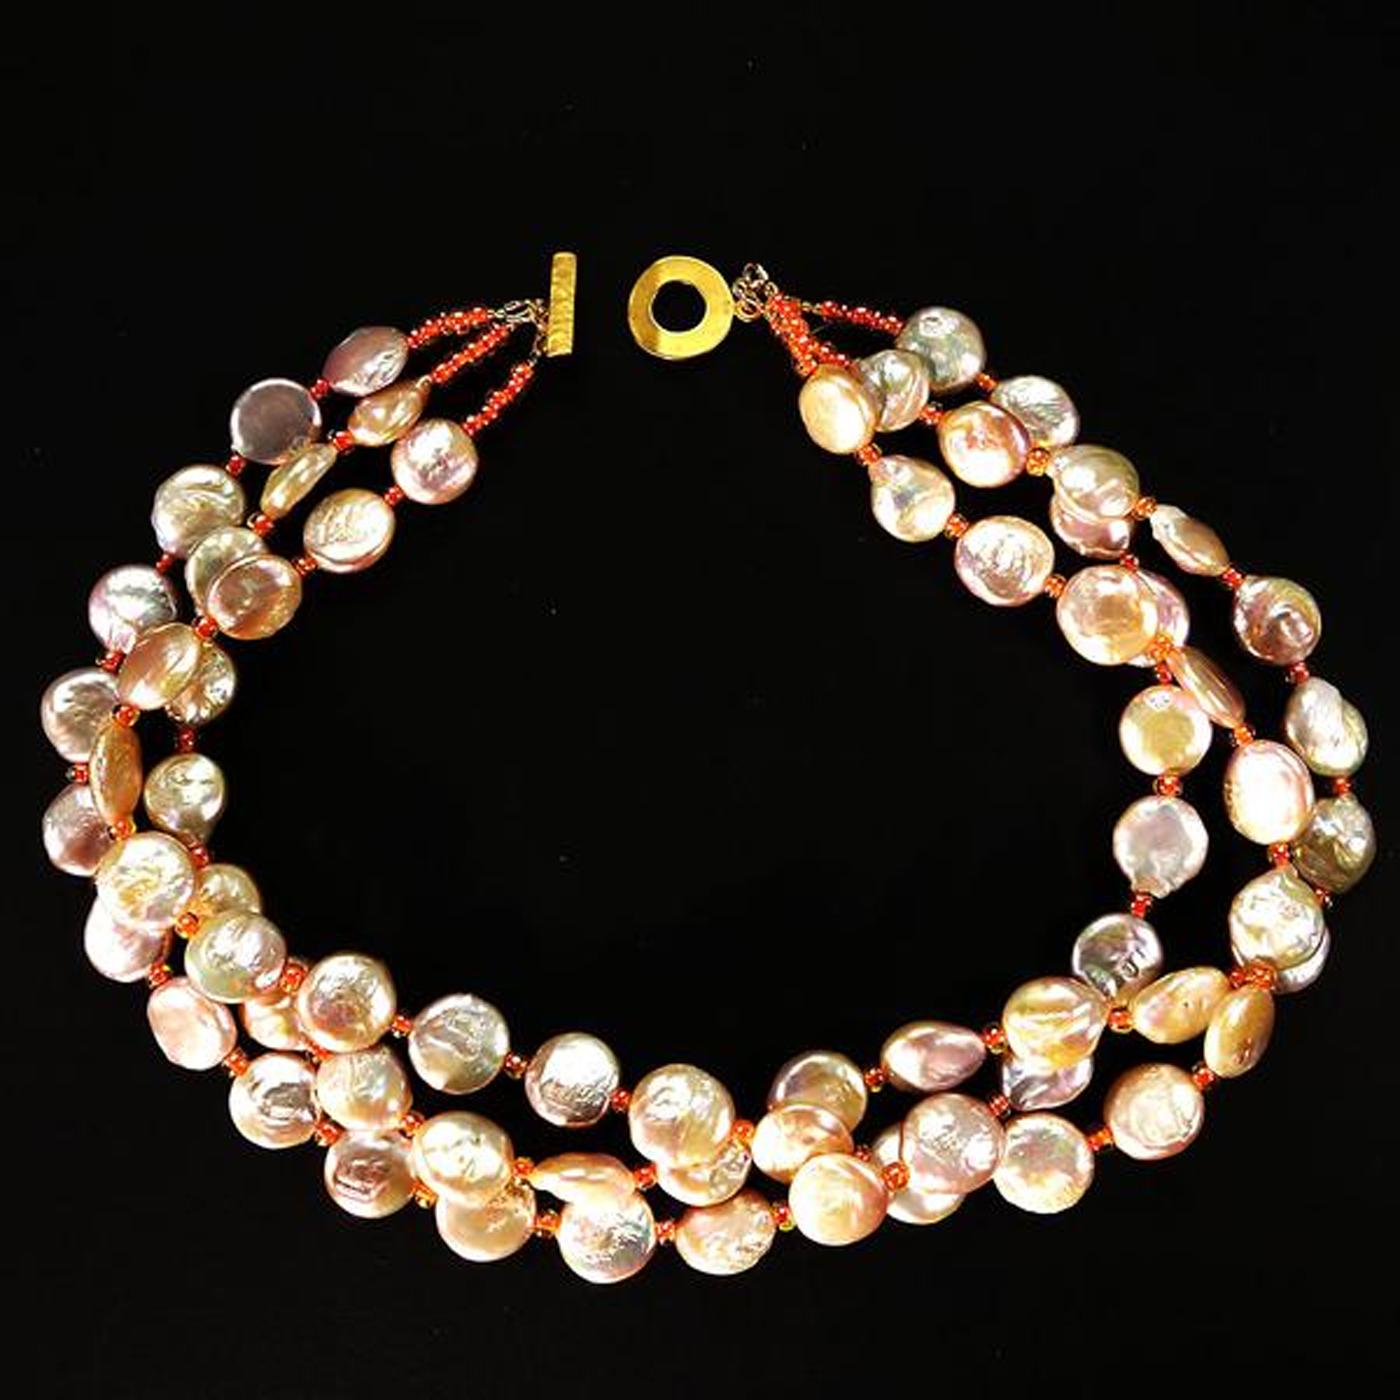 Artisan AJD Triple Strand Coin Pearl Necklace in Peachy/Pink June Birthstone  Great Gift For Sale